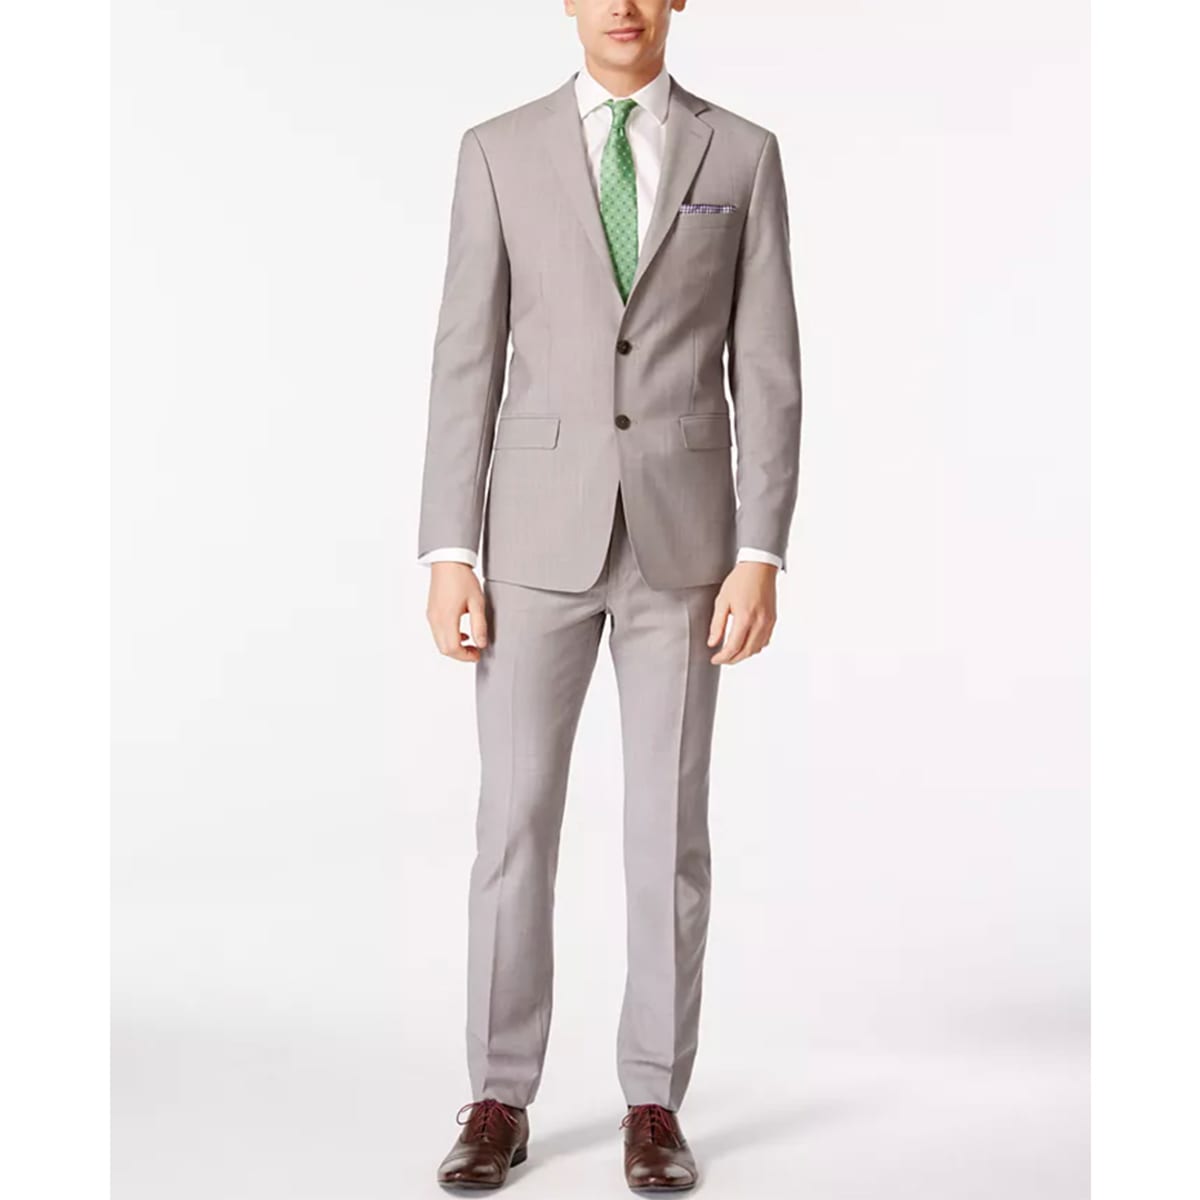 Pick up This Calvin Klein Slim Fit Suit at a Massive Discount - Men's  Journal